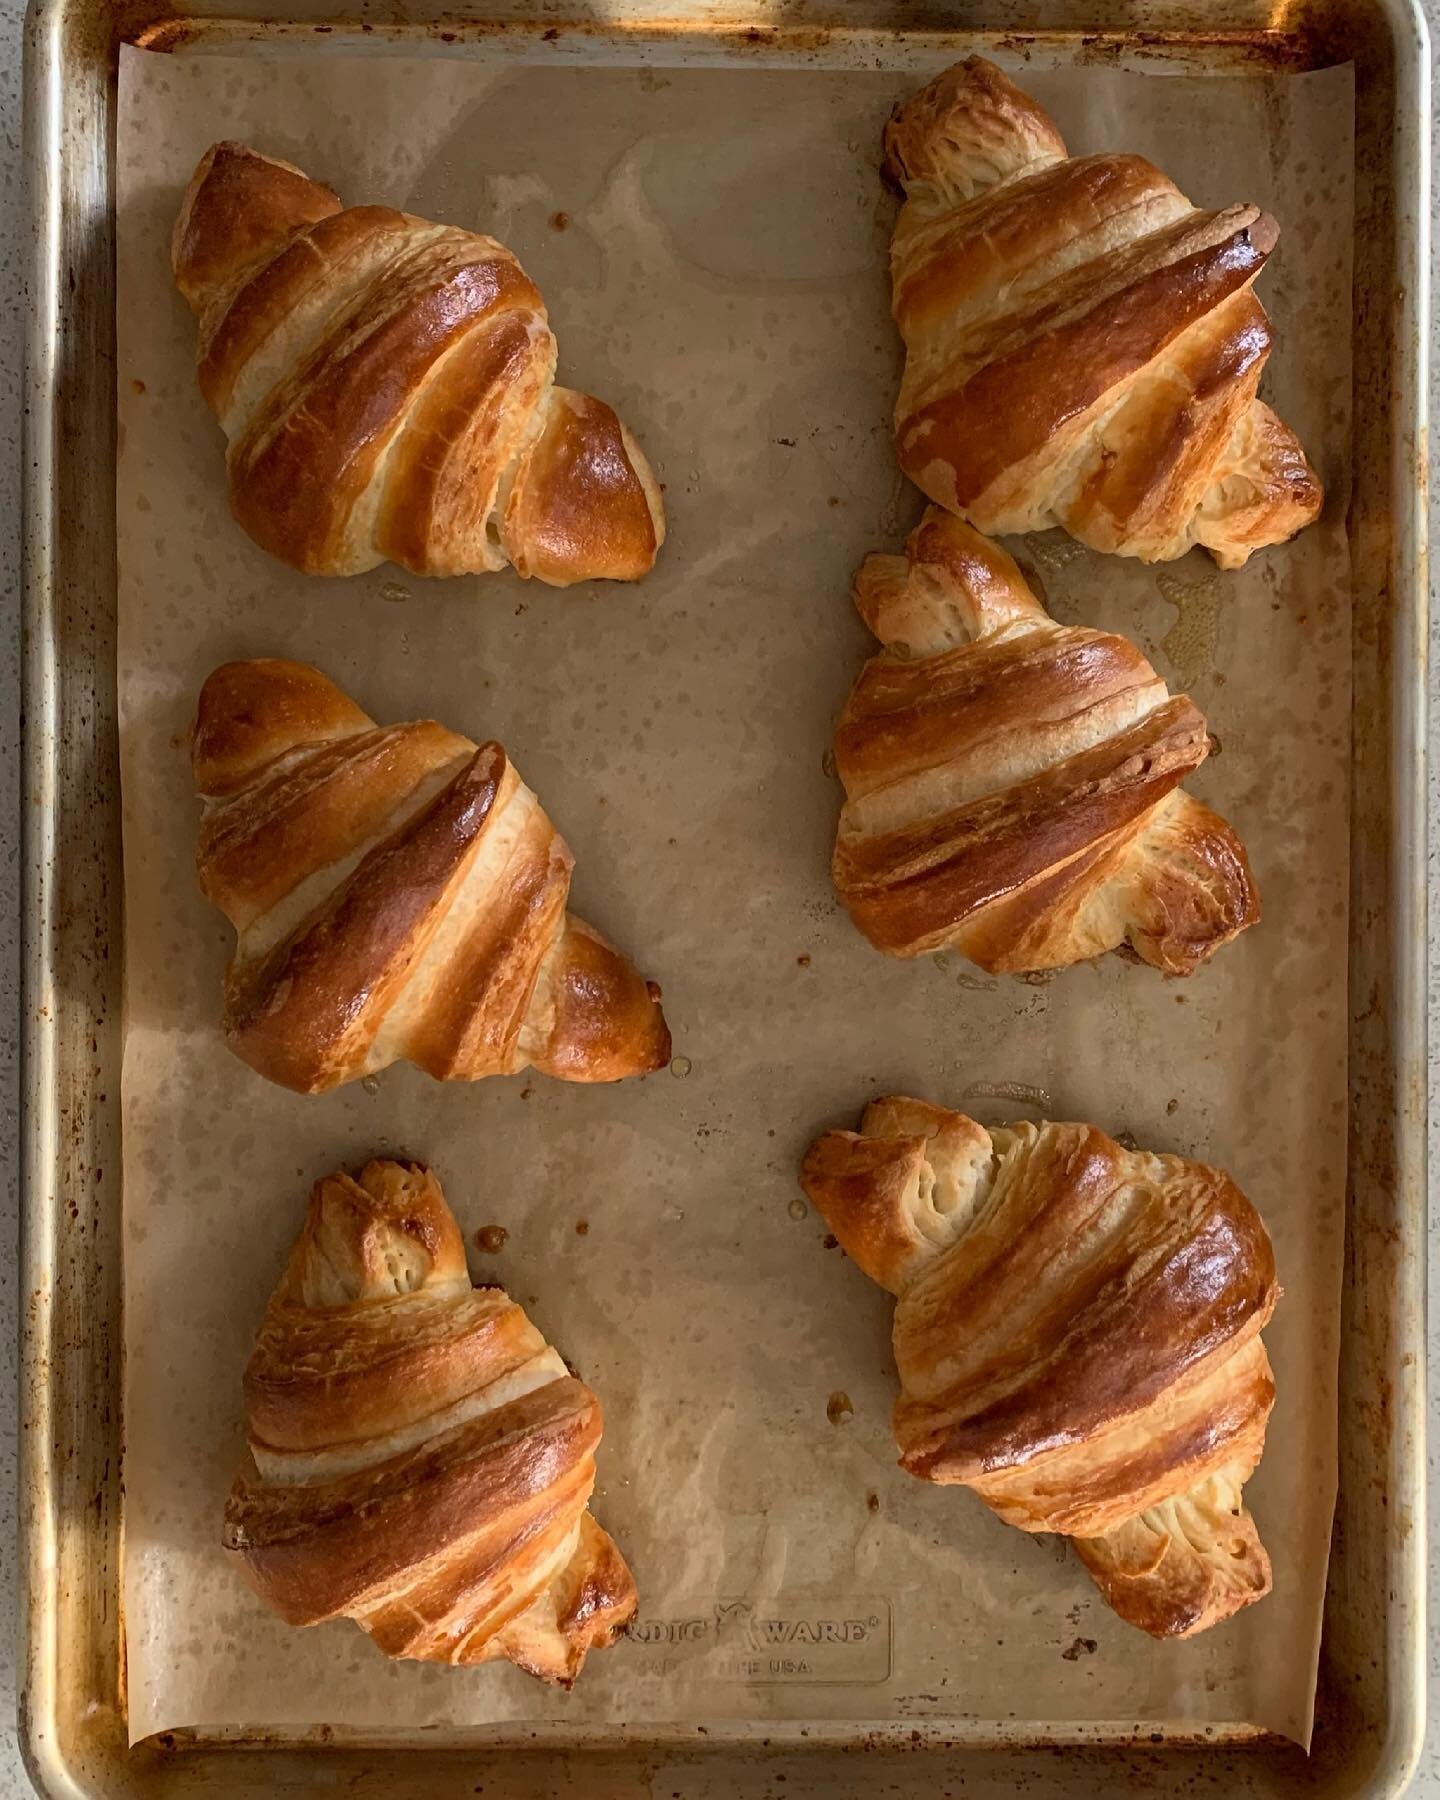 attempt at meditation through lamination.

mental health is important.
we are in this together.

#weareinthistogether #notequaluntilweareallequal #croissant